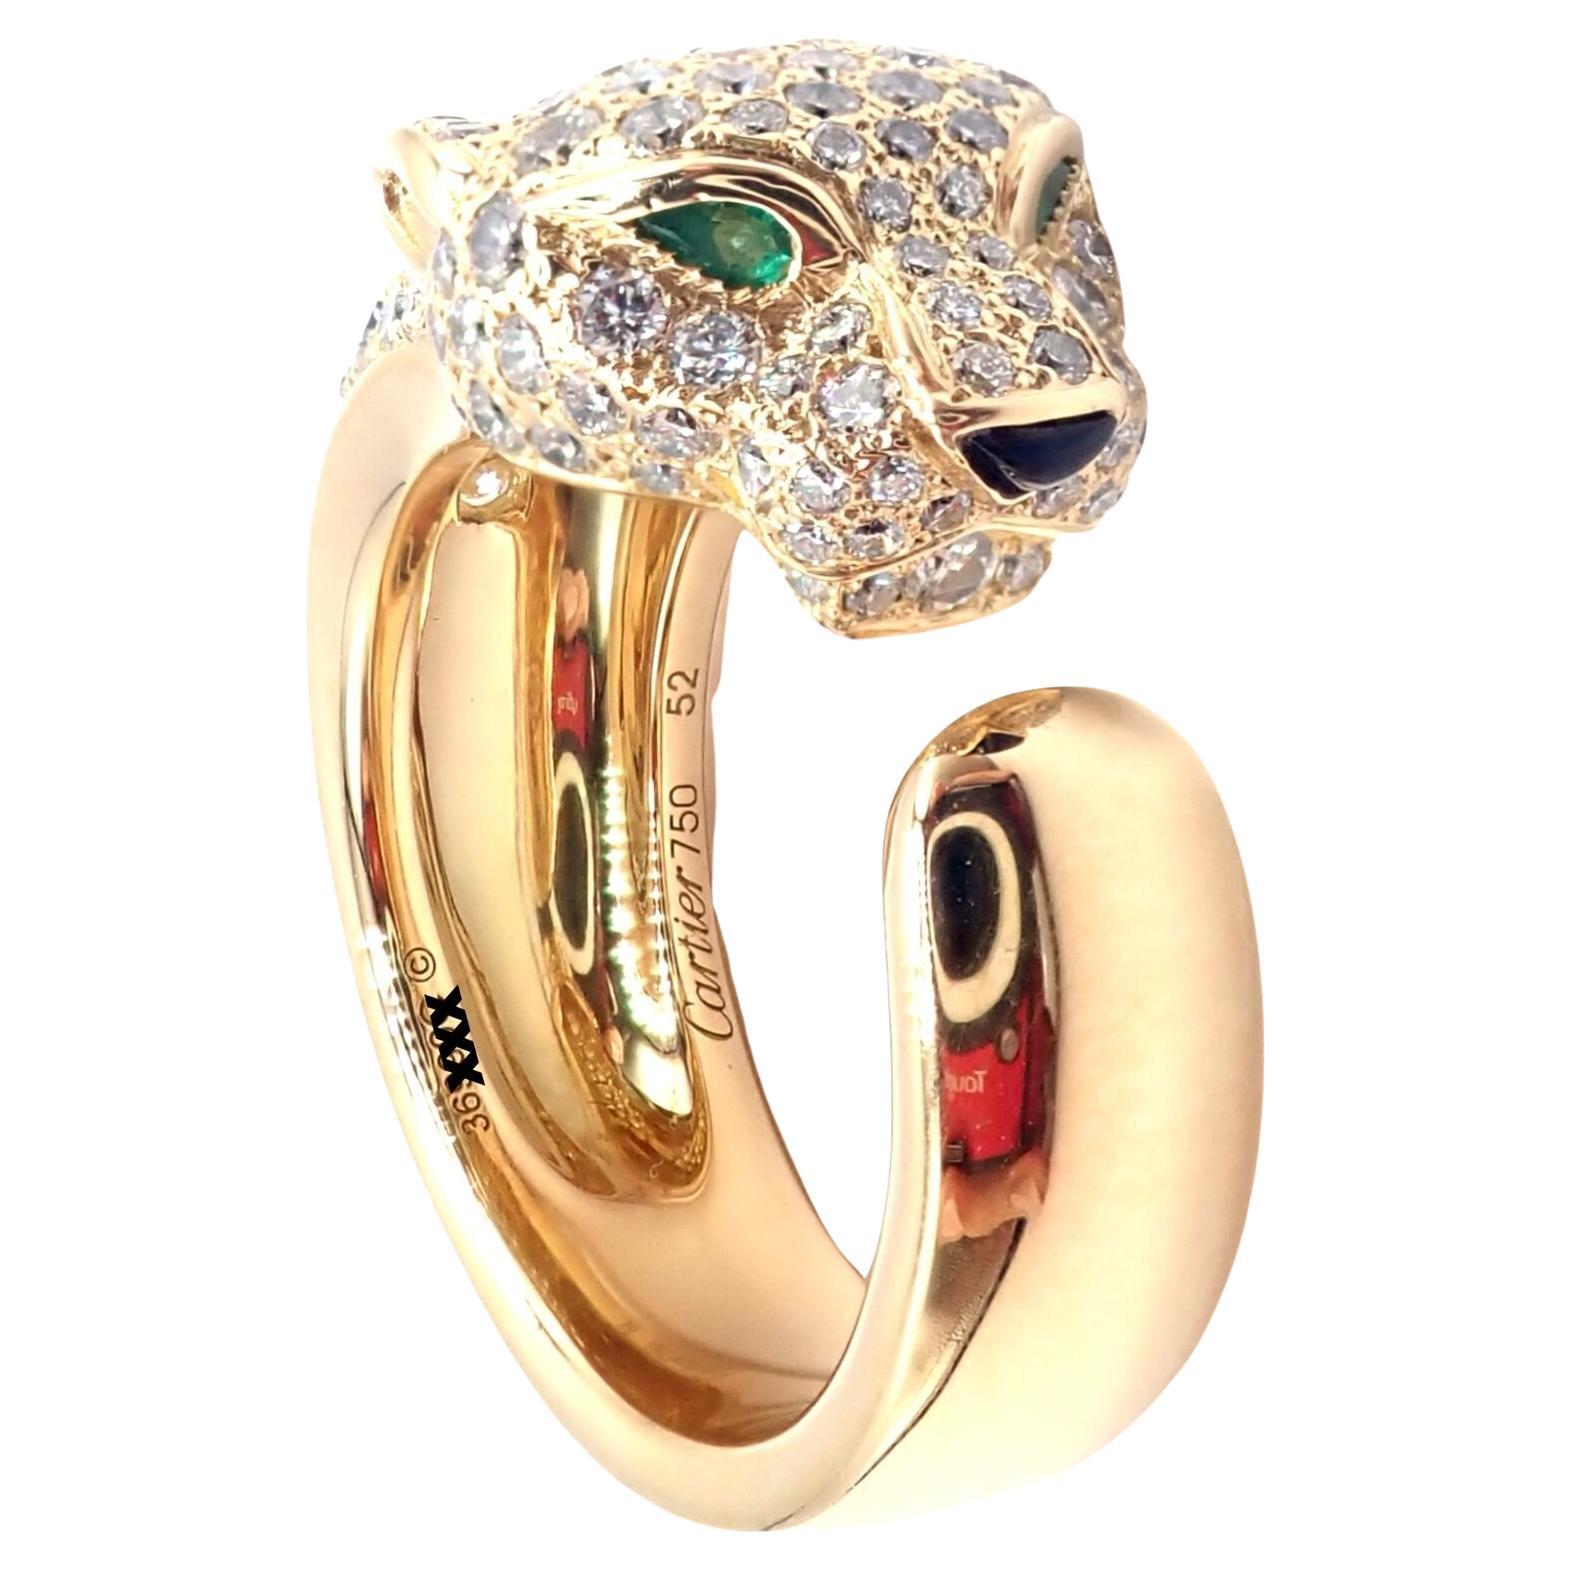 Cartier Goldring, Panther Panthere Smaragd Onyx Diamant